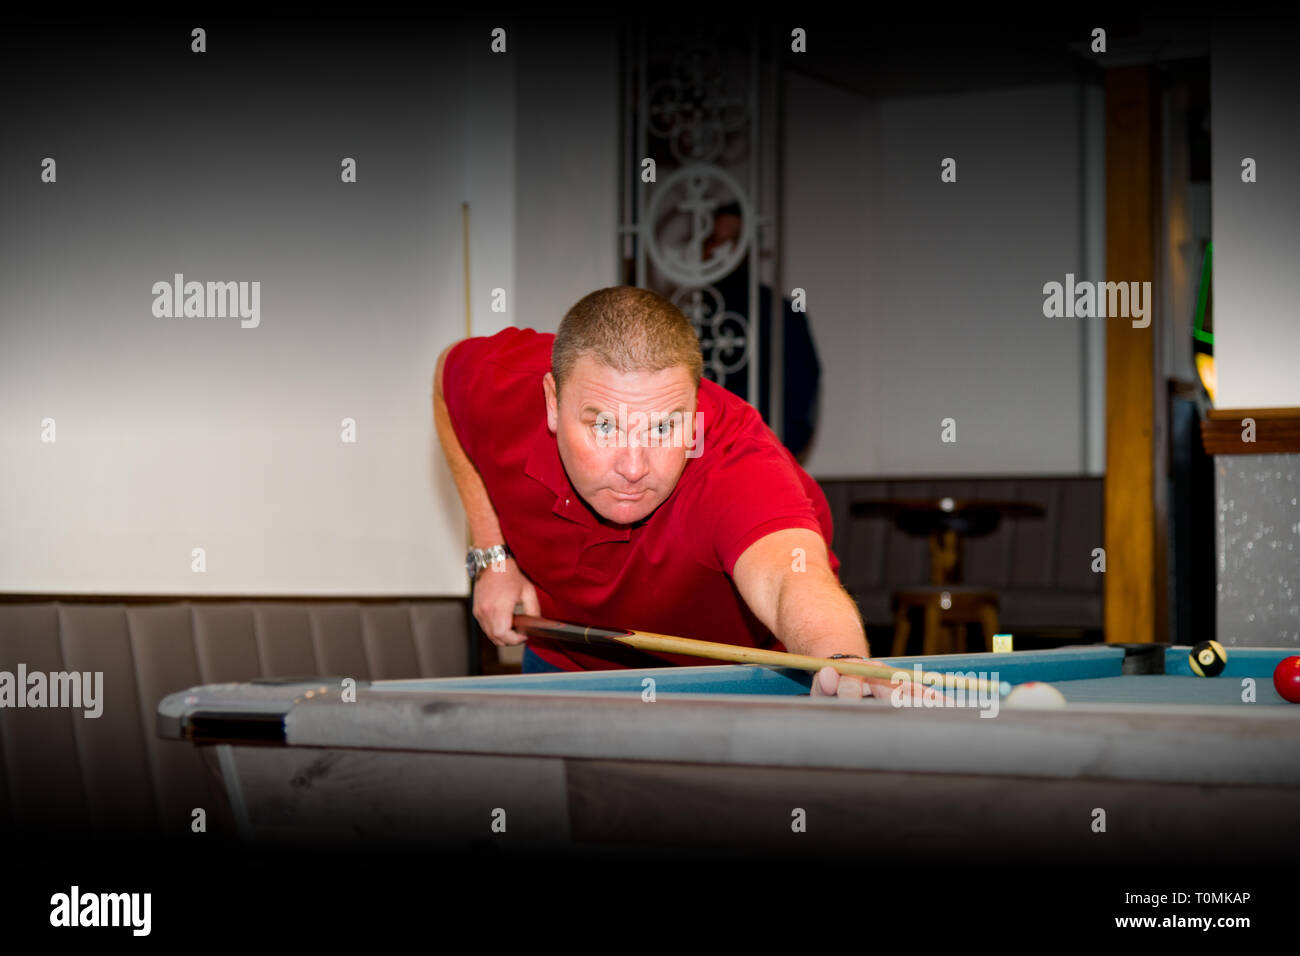 A middle aged pool player in a red shirts takes a shot Stock Photo